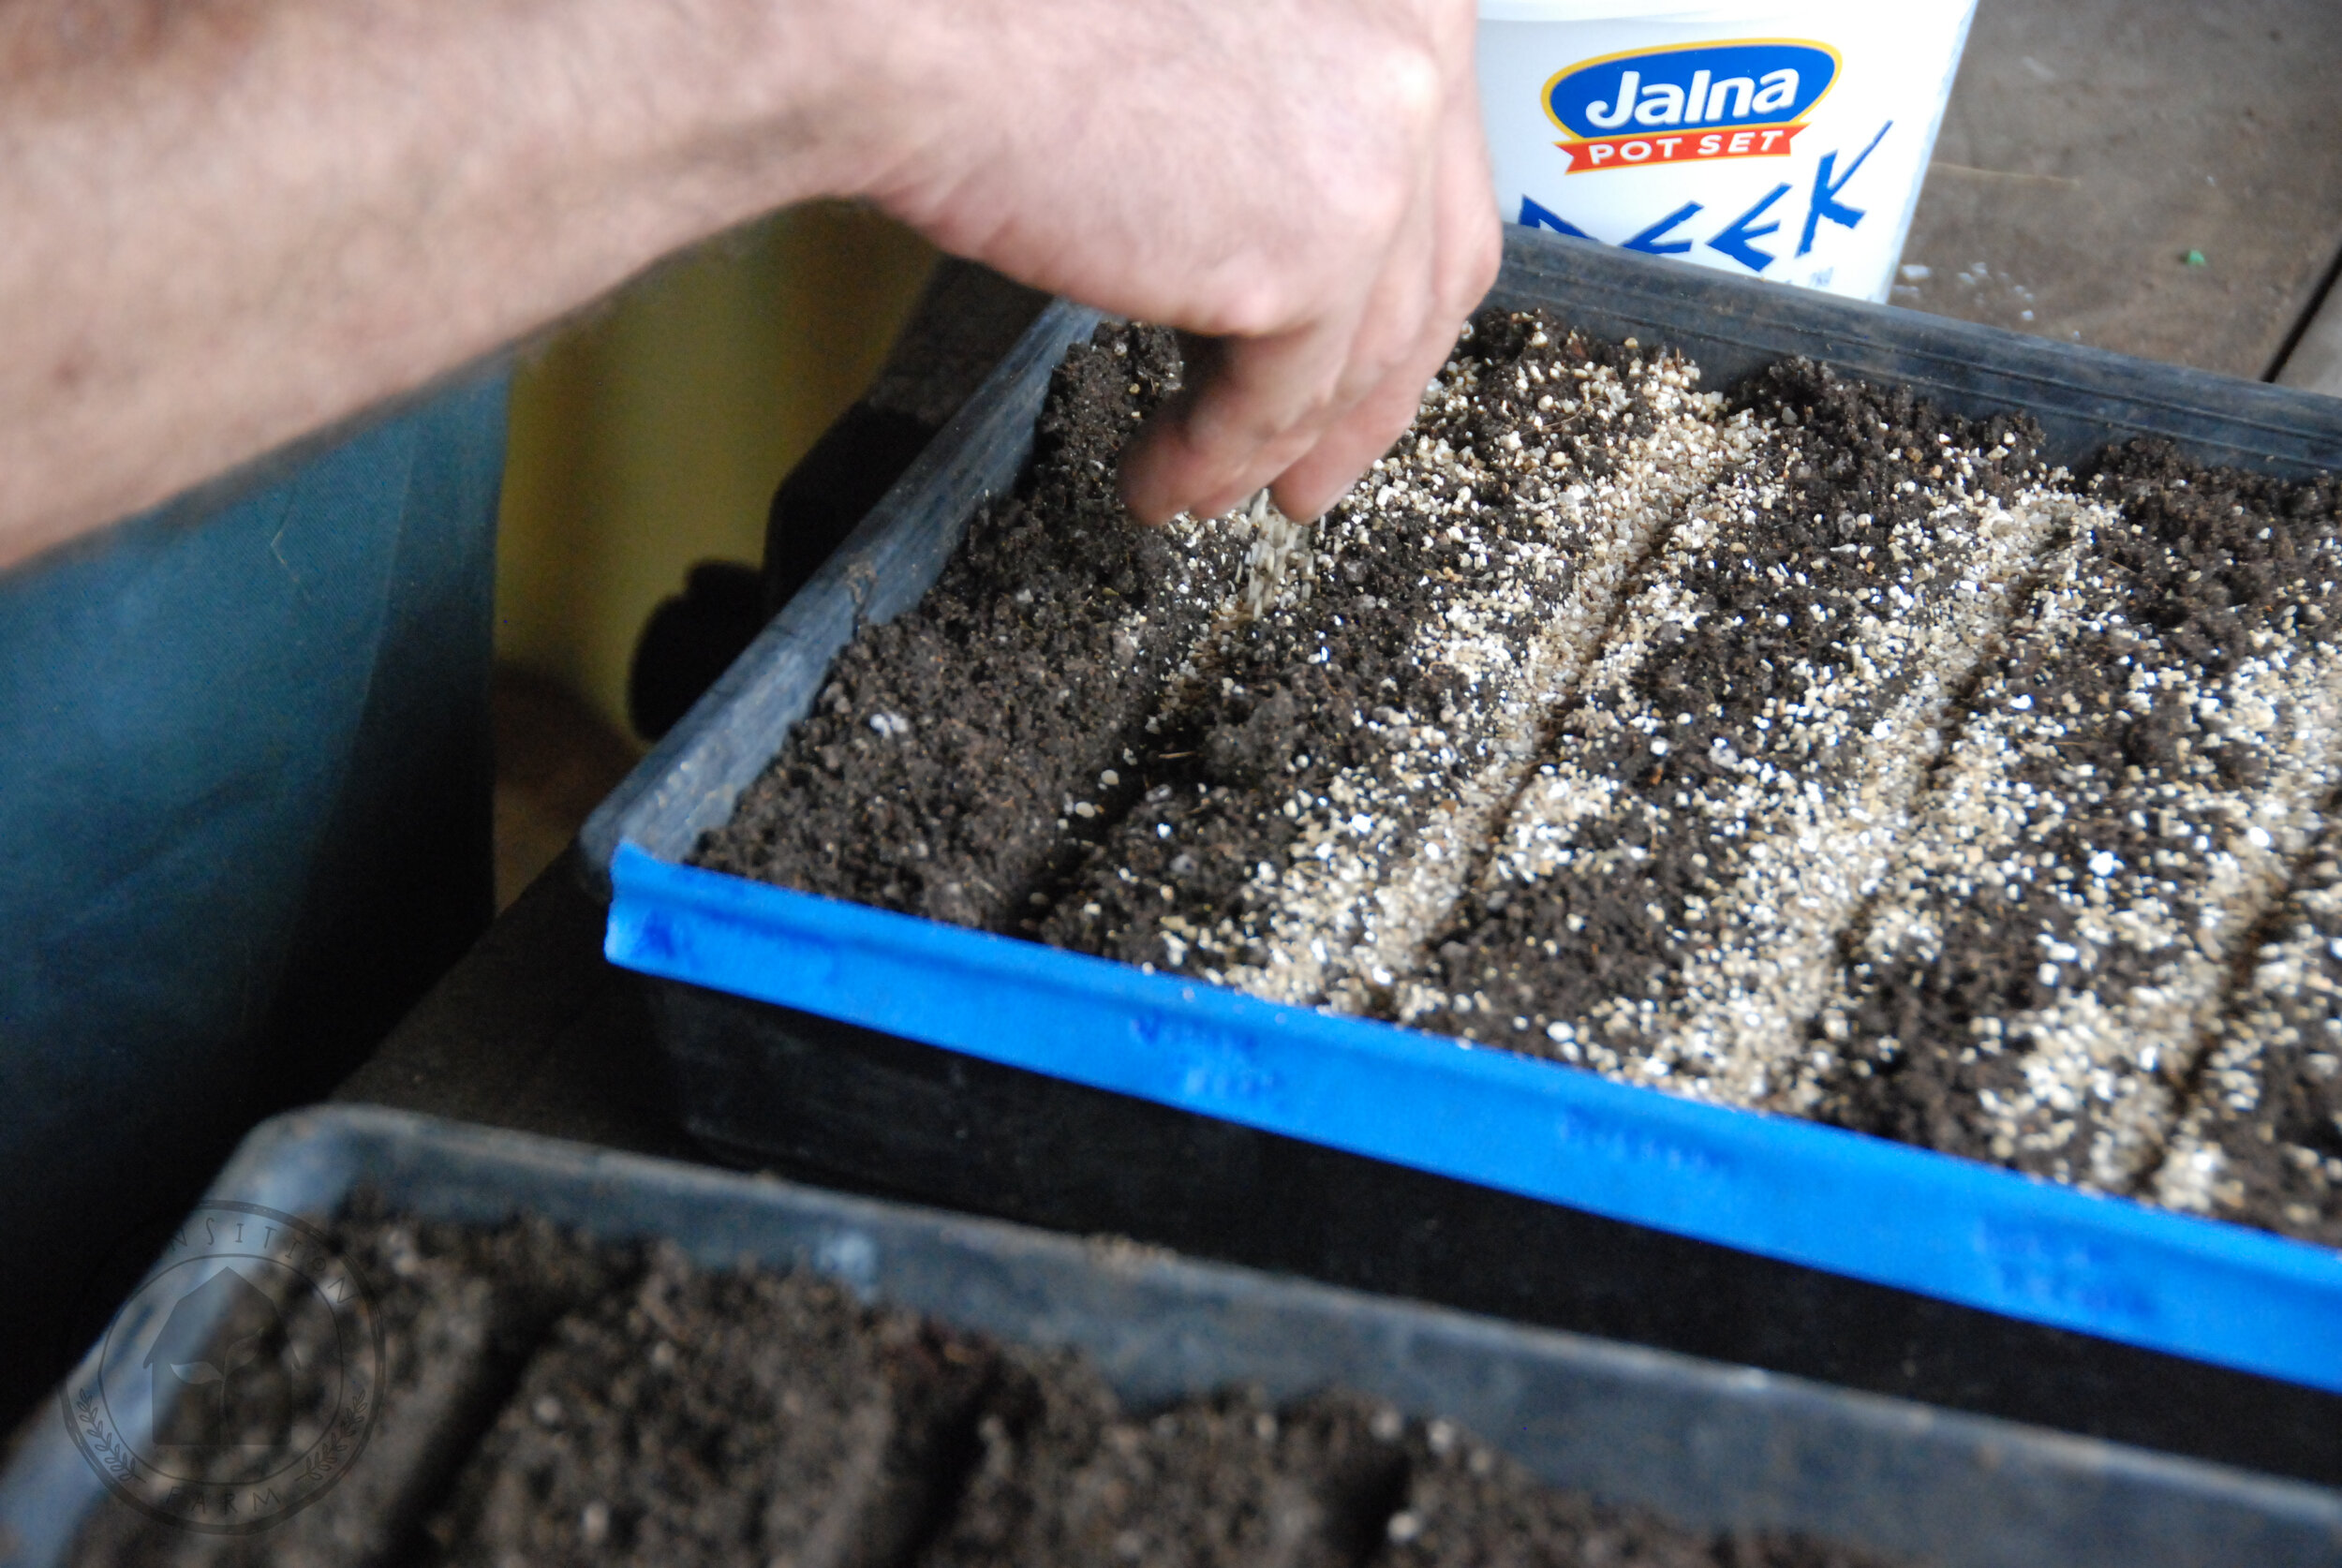   COVER - Cover Seeds With Vermiculite.  As we have created a trench at the correct sowing depth for the seed, we simply cover to the height of the soil.     WATER - Gently water seeds in. Use a hose attachment that allows a gentle shower…(think you 